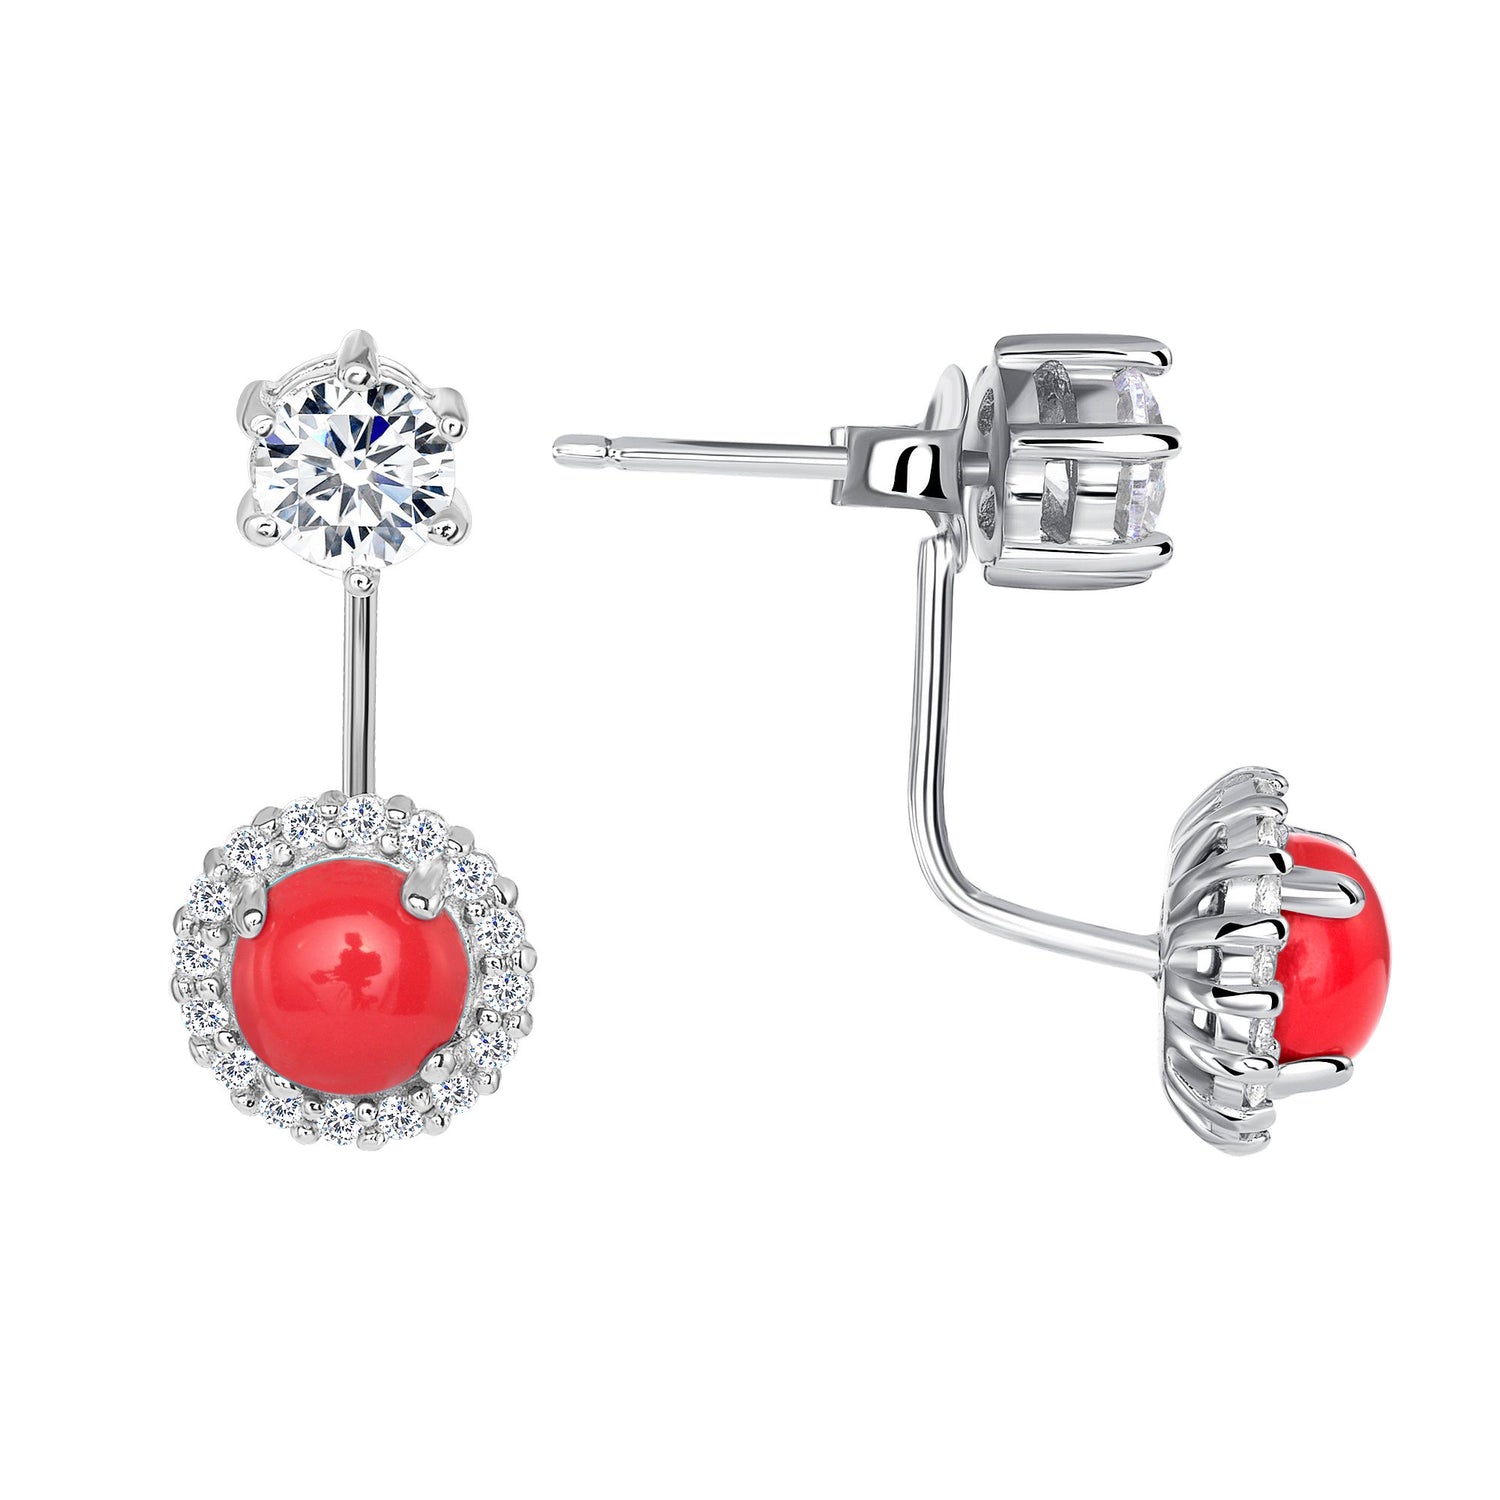 925 Sterling Silver Halo Round Gemstone and CZ Jacket Earrings